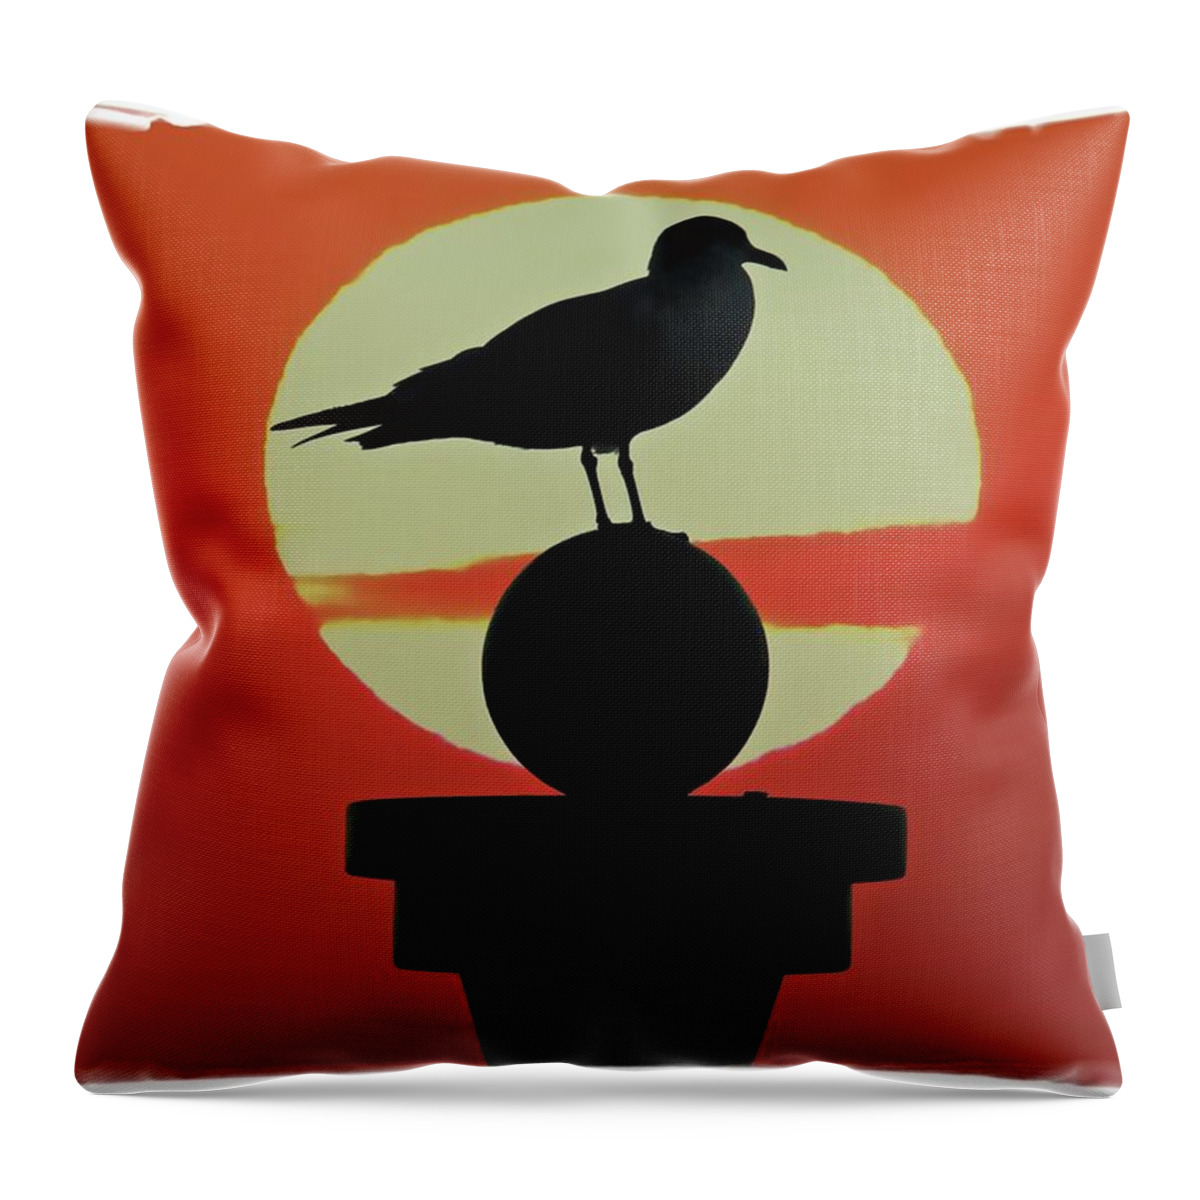 Alicegipsonphotographs Throw Pillow featuring the photograph Seagull Sunset by Alice Gipson